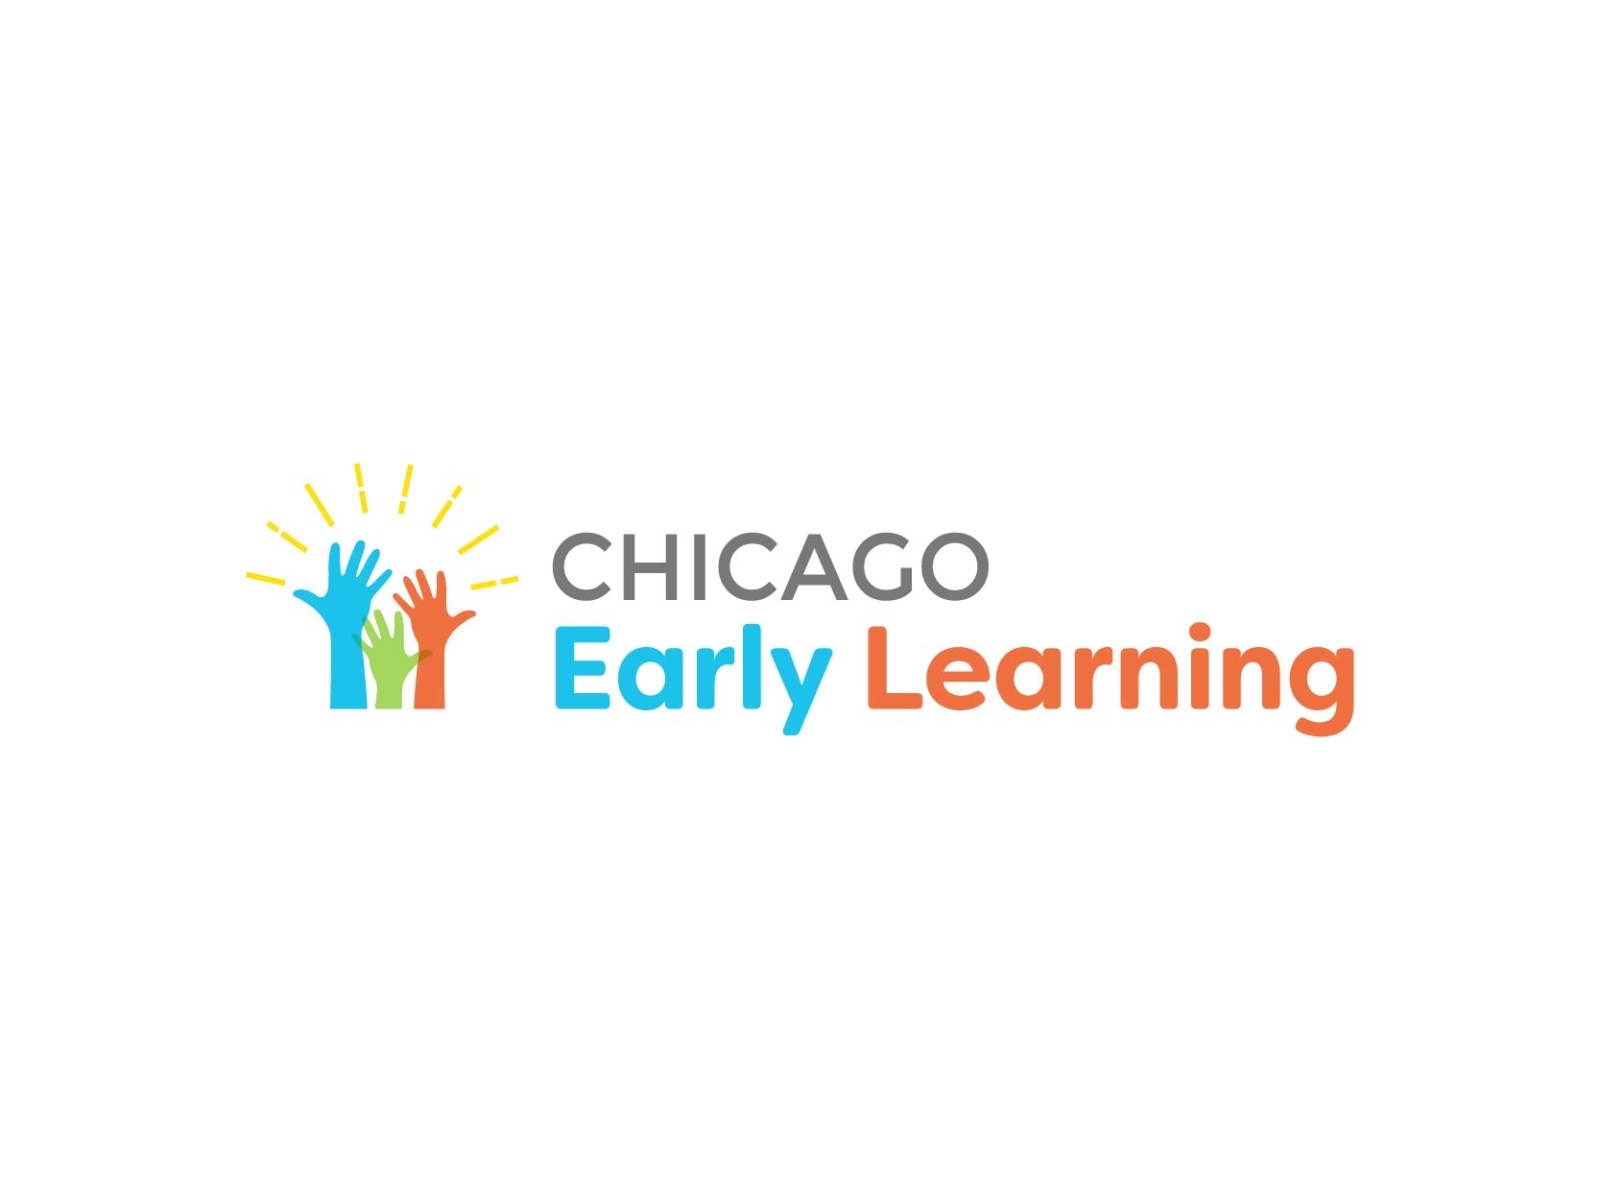 Chicago Early Learning Logo By Camilo Vera On Dribbble 4140